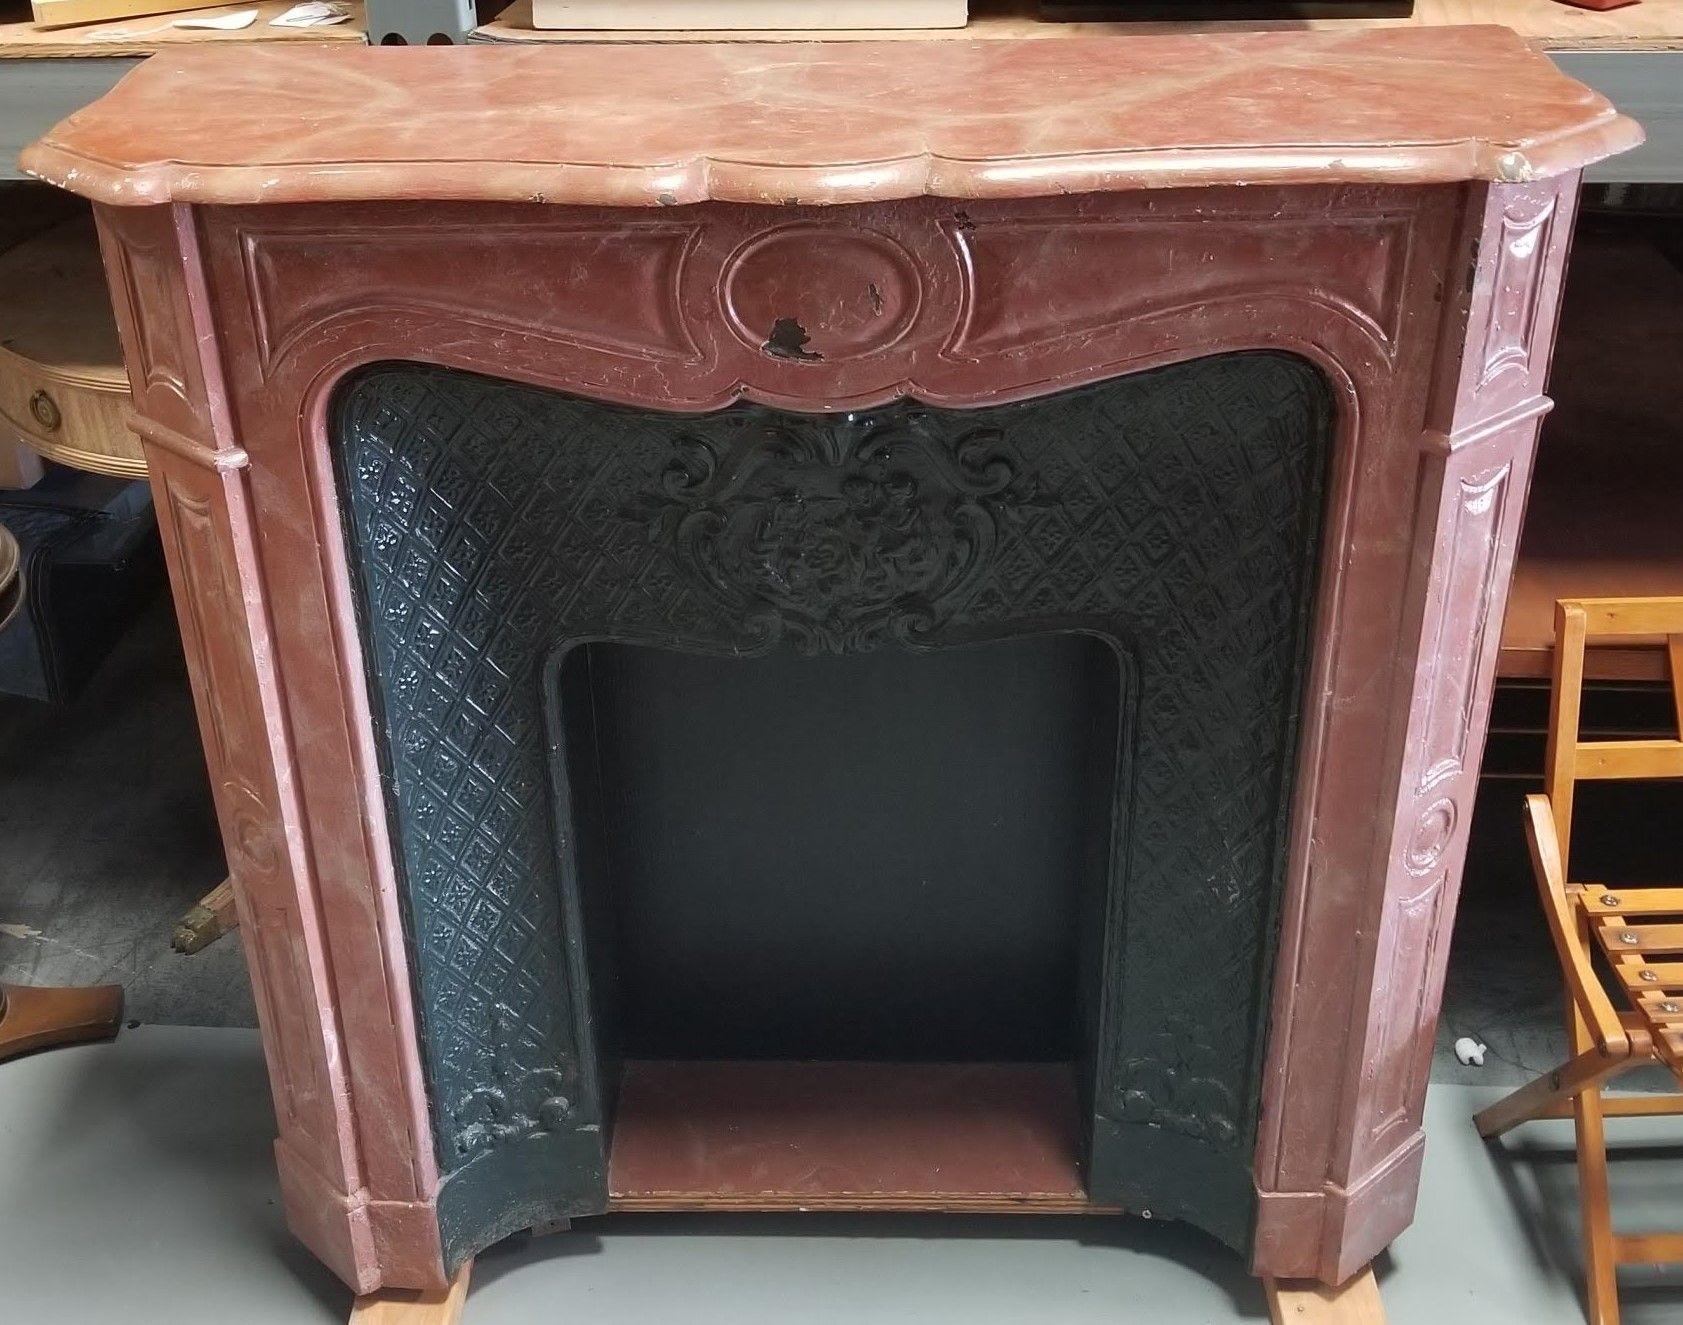 The Louis XV Style Burgundy Metal Faux Fireplace Mantle combines the opulence of the 18th century with modern materials. Crafted from durable metal, it boasts intricate Louis XV motifs, finished in a rich Burgundy hue. This elegant piece adds a